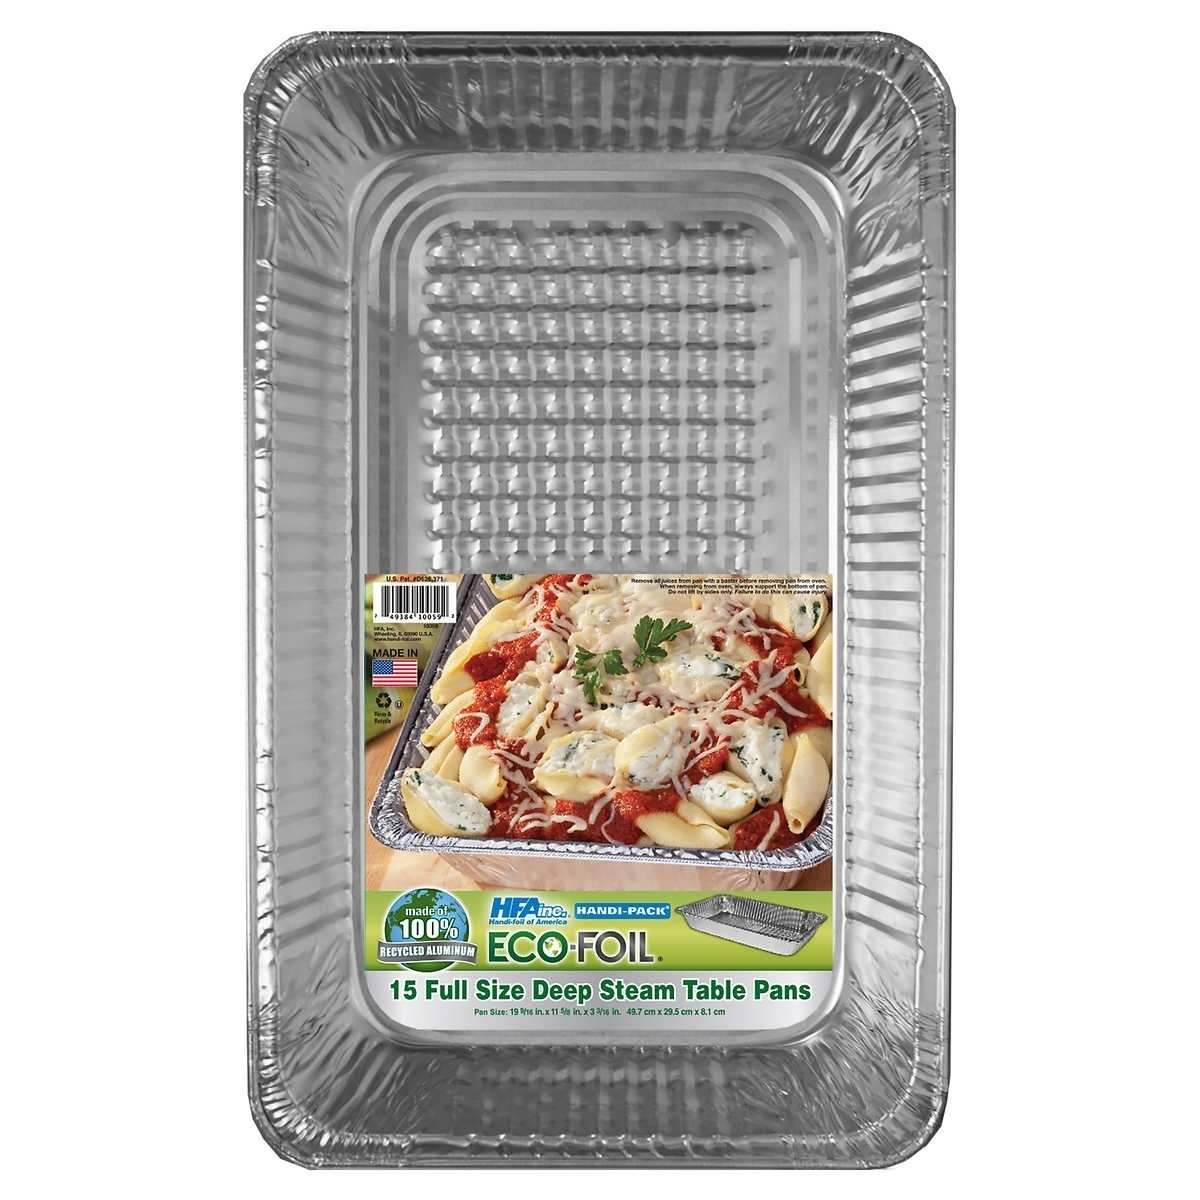 Eco-Foil Full Size Deep Steam Table Pans, 15 Count